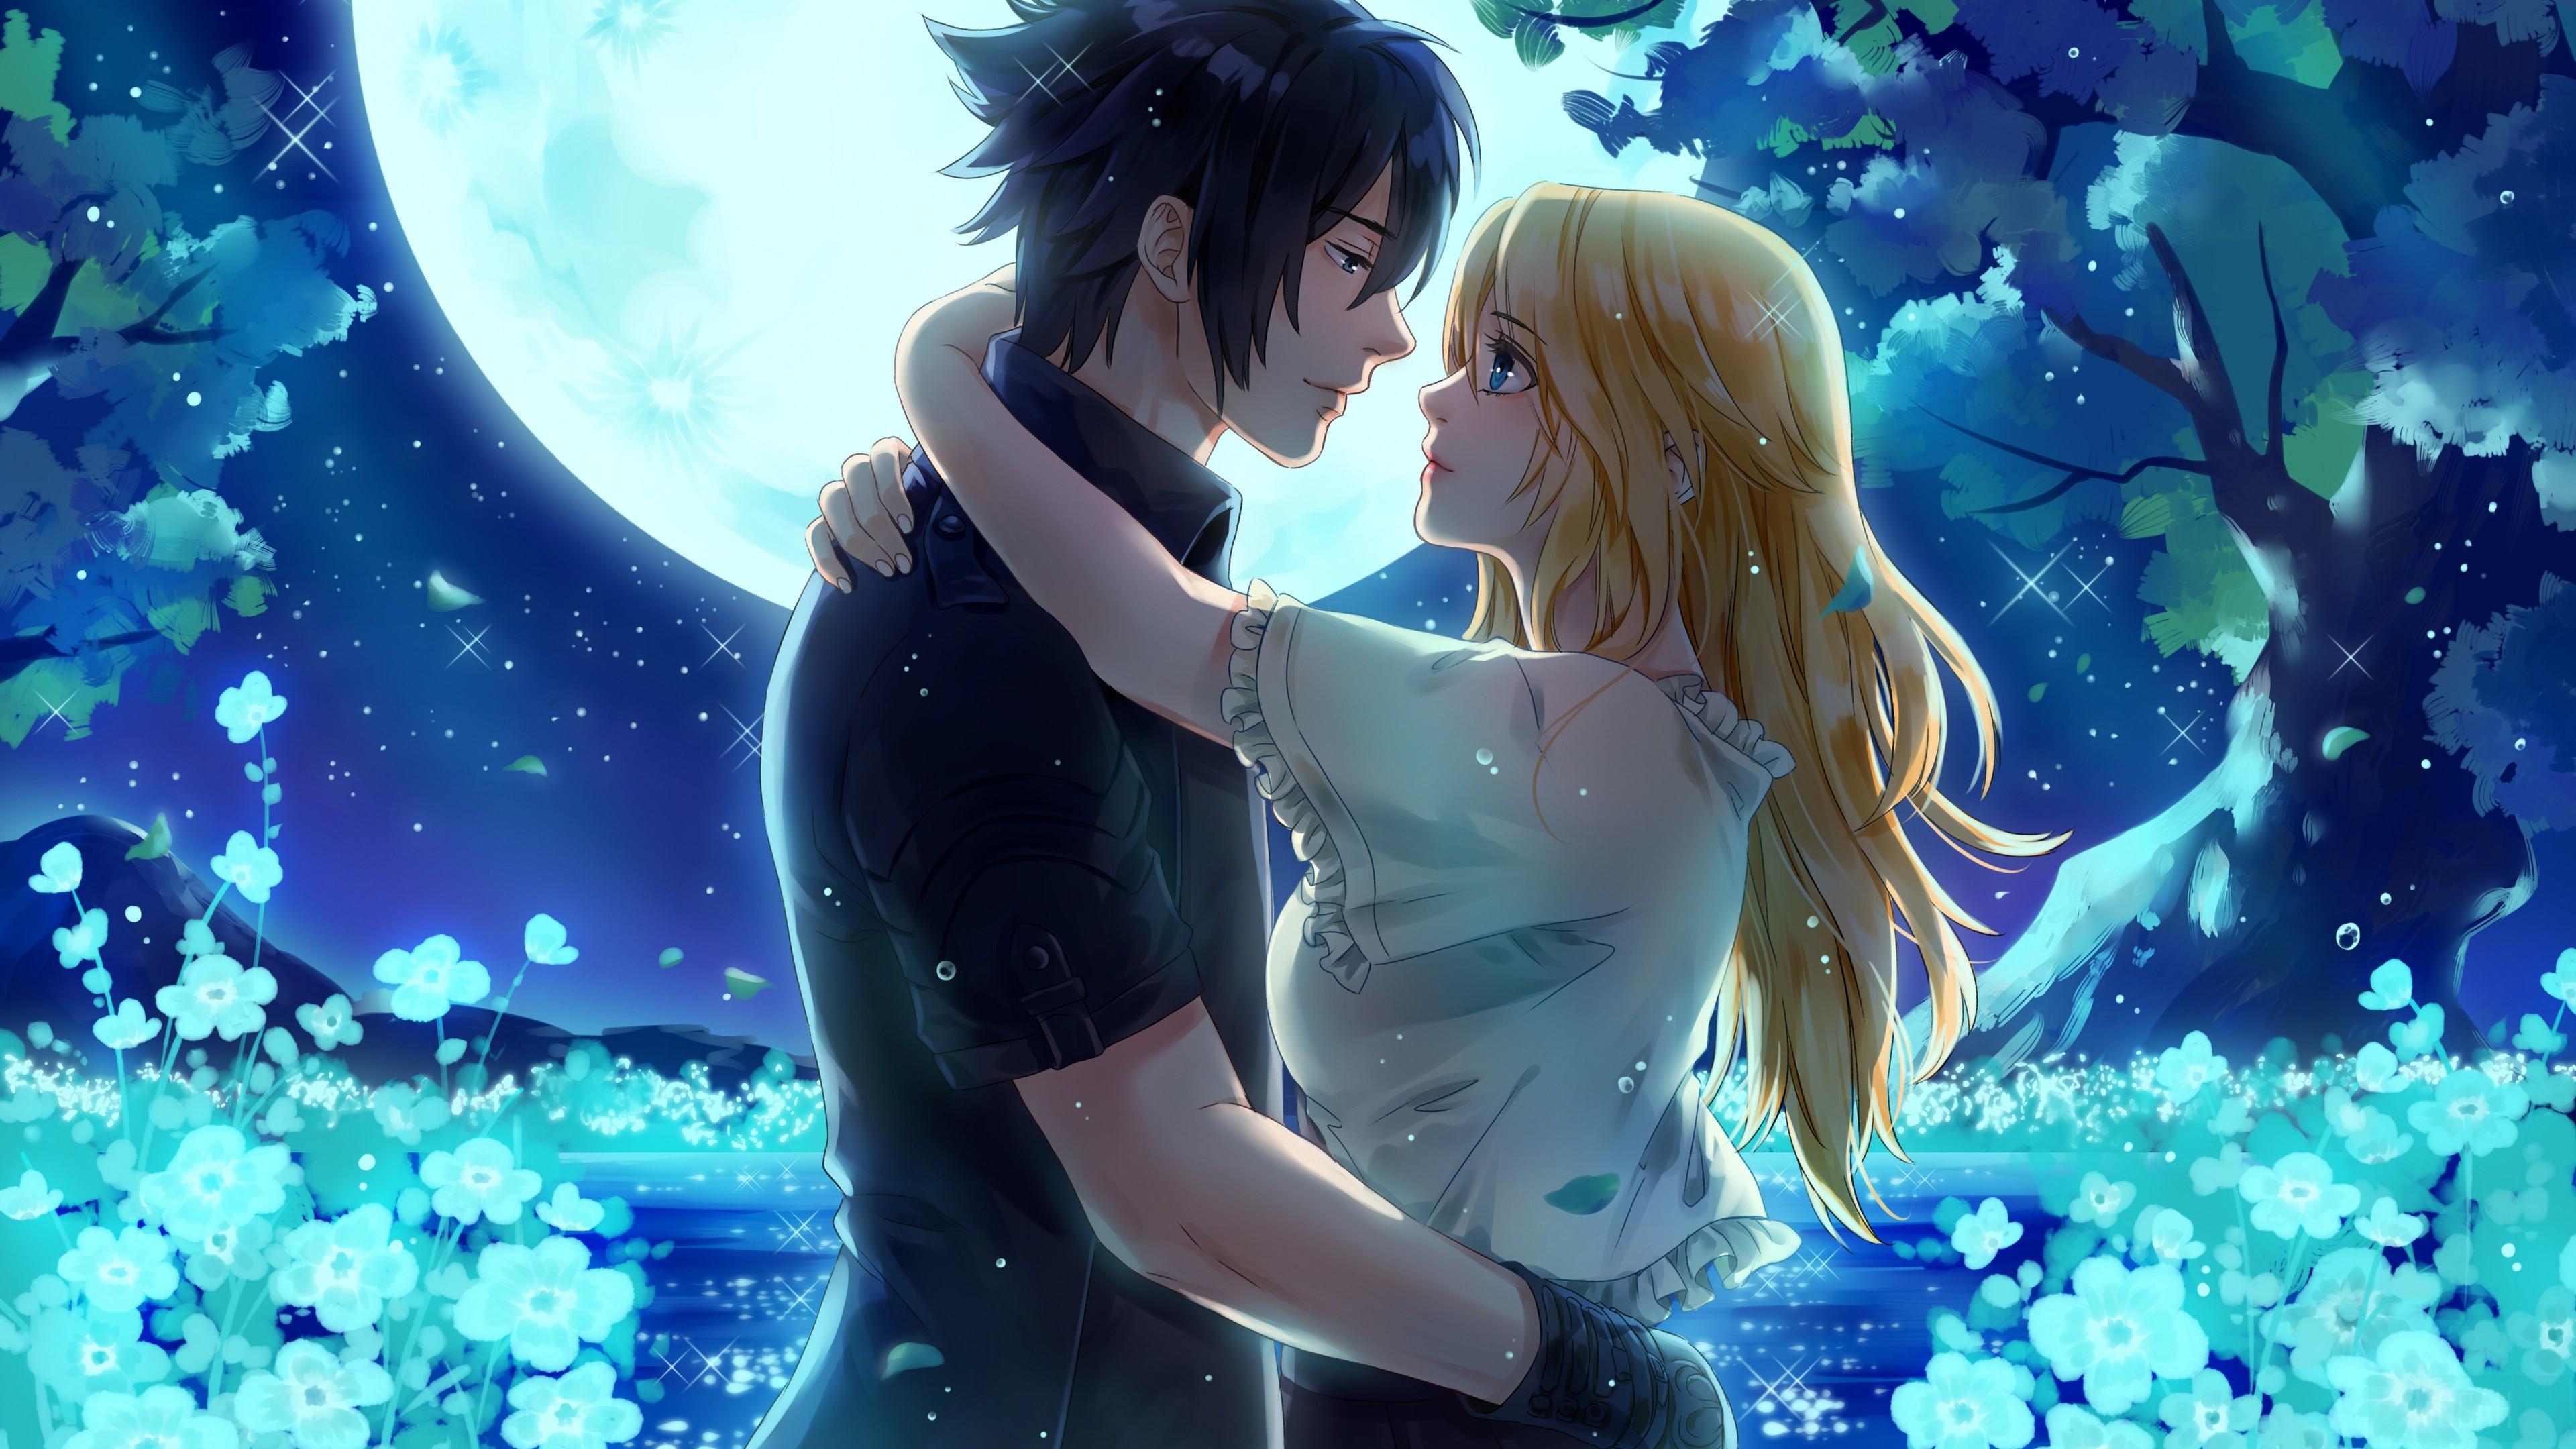 HD wallpaper, Noctis And Stella From Final Fantasy Xv Under The Moon 4K